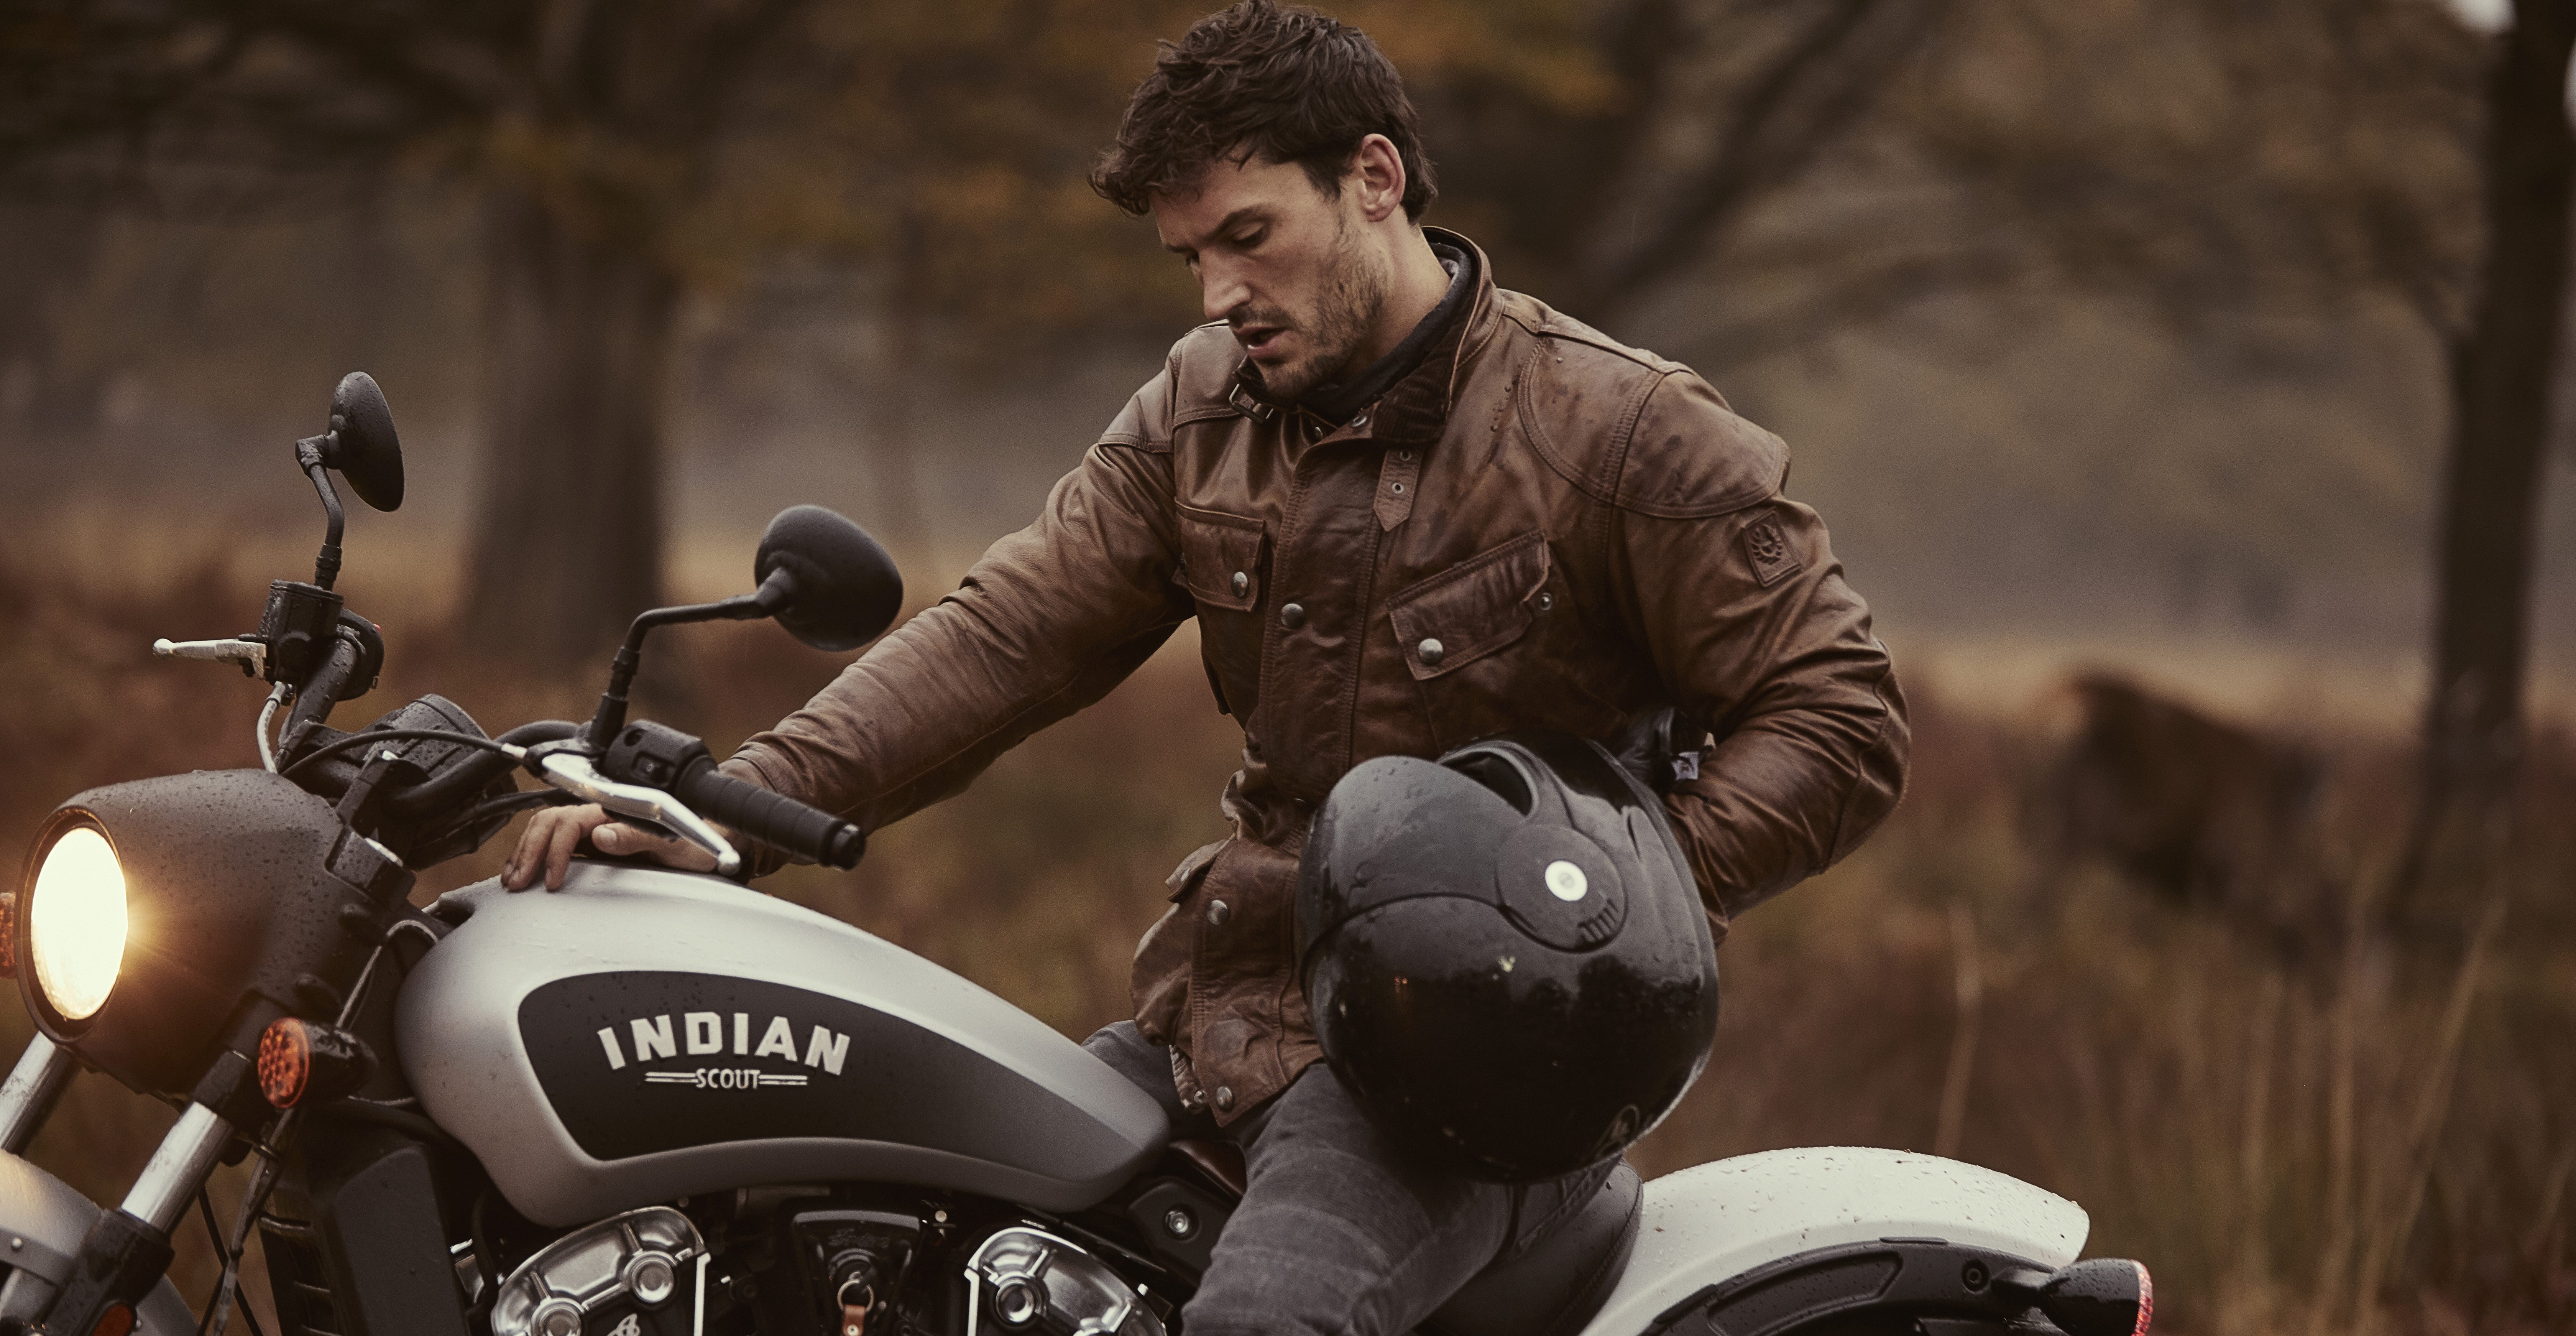 Looking for a fashionable Motorcycle Leather that looks great on and off  the bike!